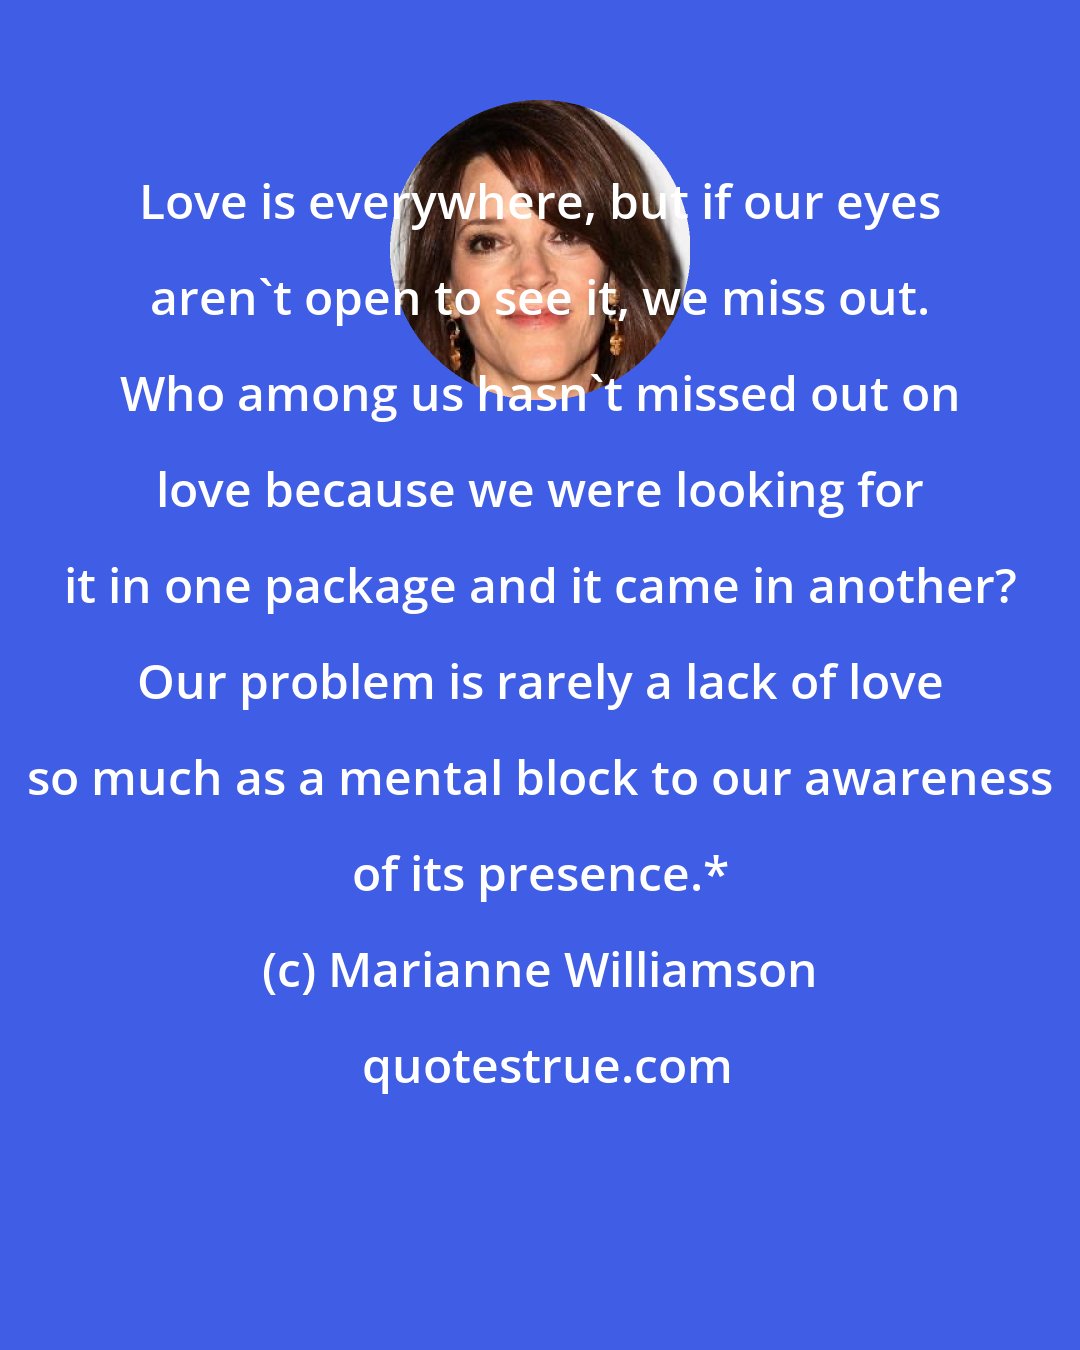 Marianne Williamson: Love is everywhere, but if our eyes aren't open to see it, we miss out. Who among us hasn't missed out on love because we were looking for it in one package and it came in another? Our problem is rarely a lack of love so much as a mental block to our awareness of its presence.*